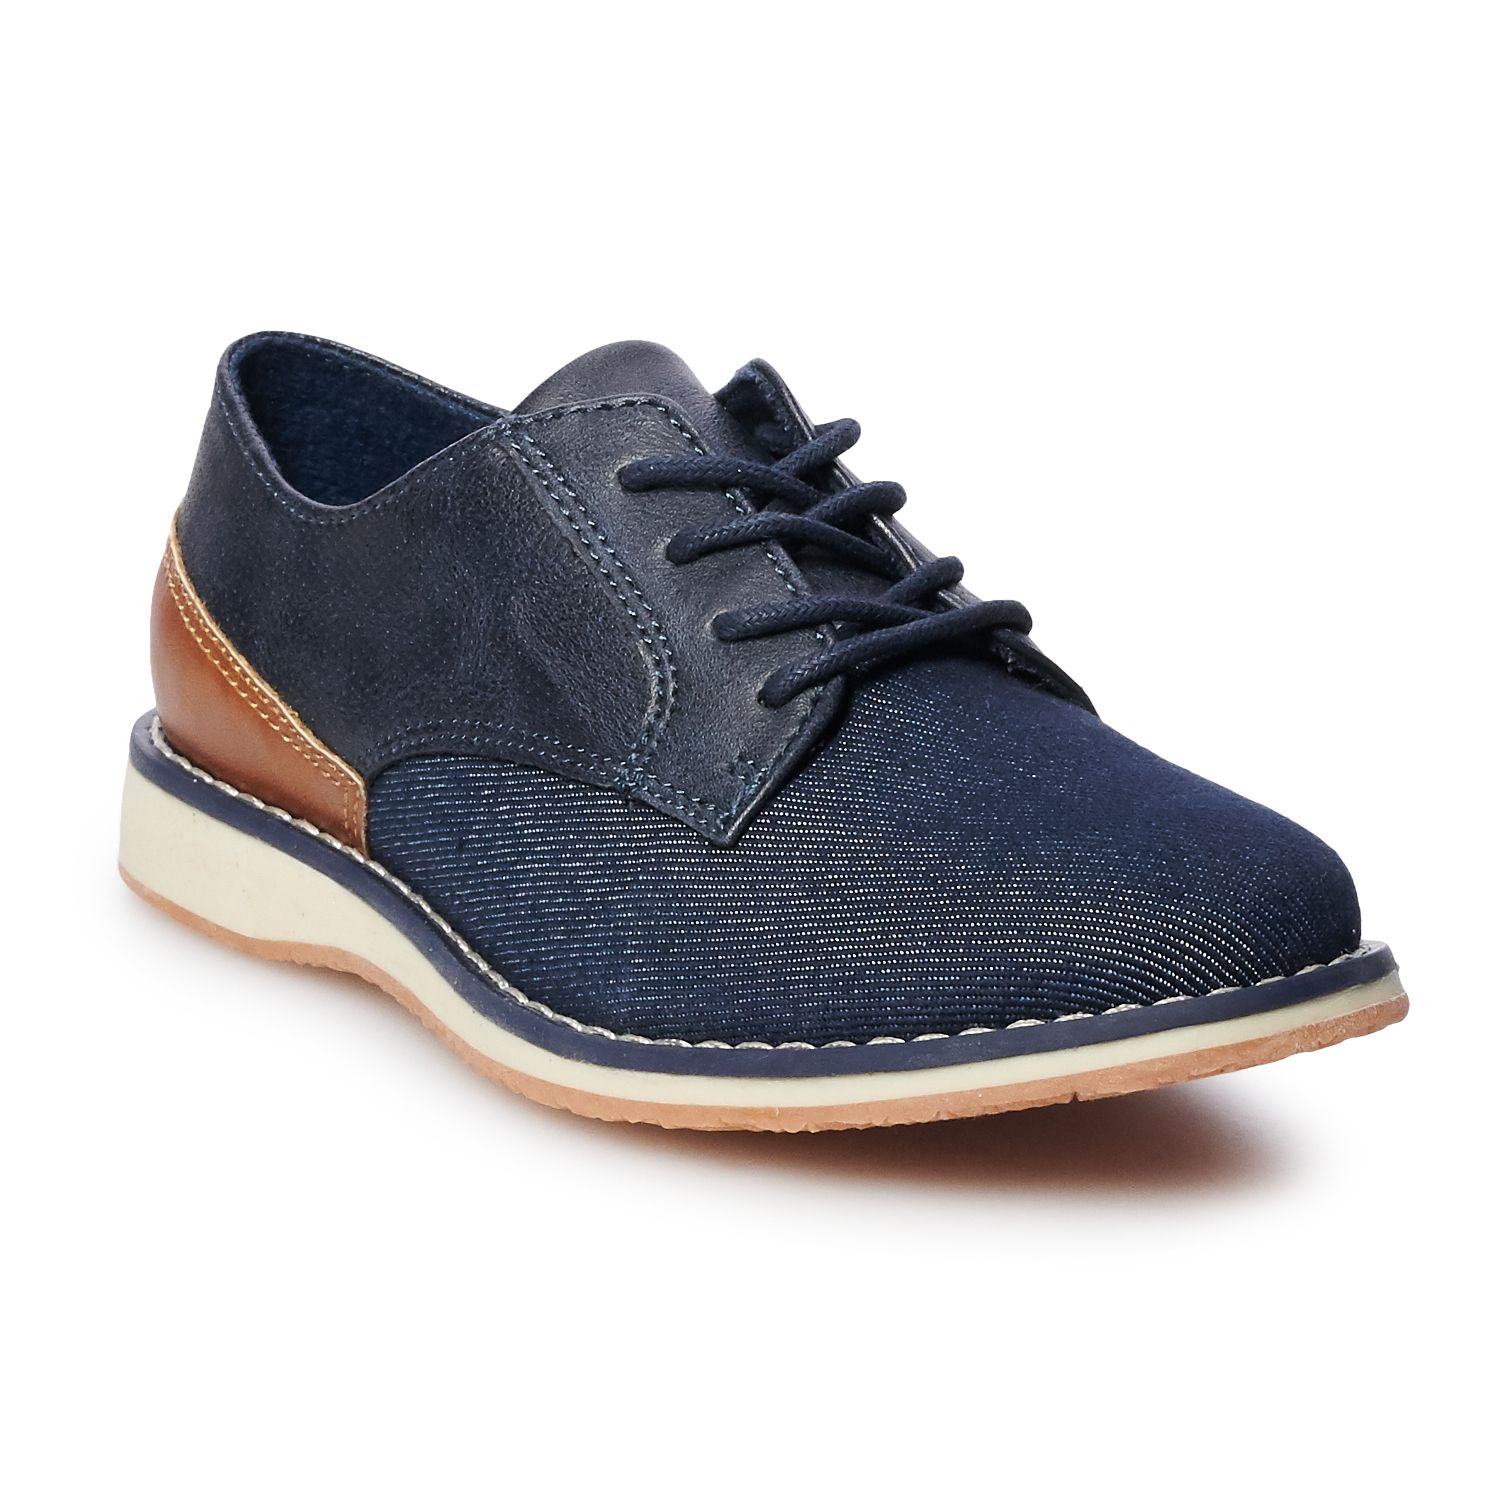 navy blue dress shoes for boys